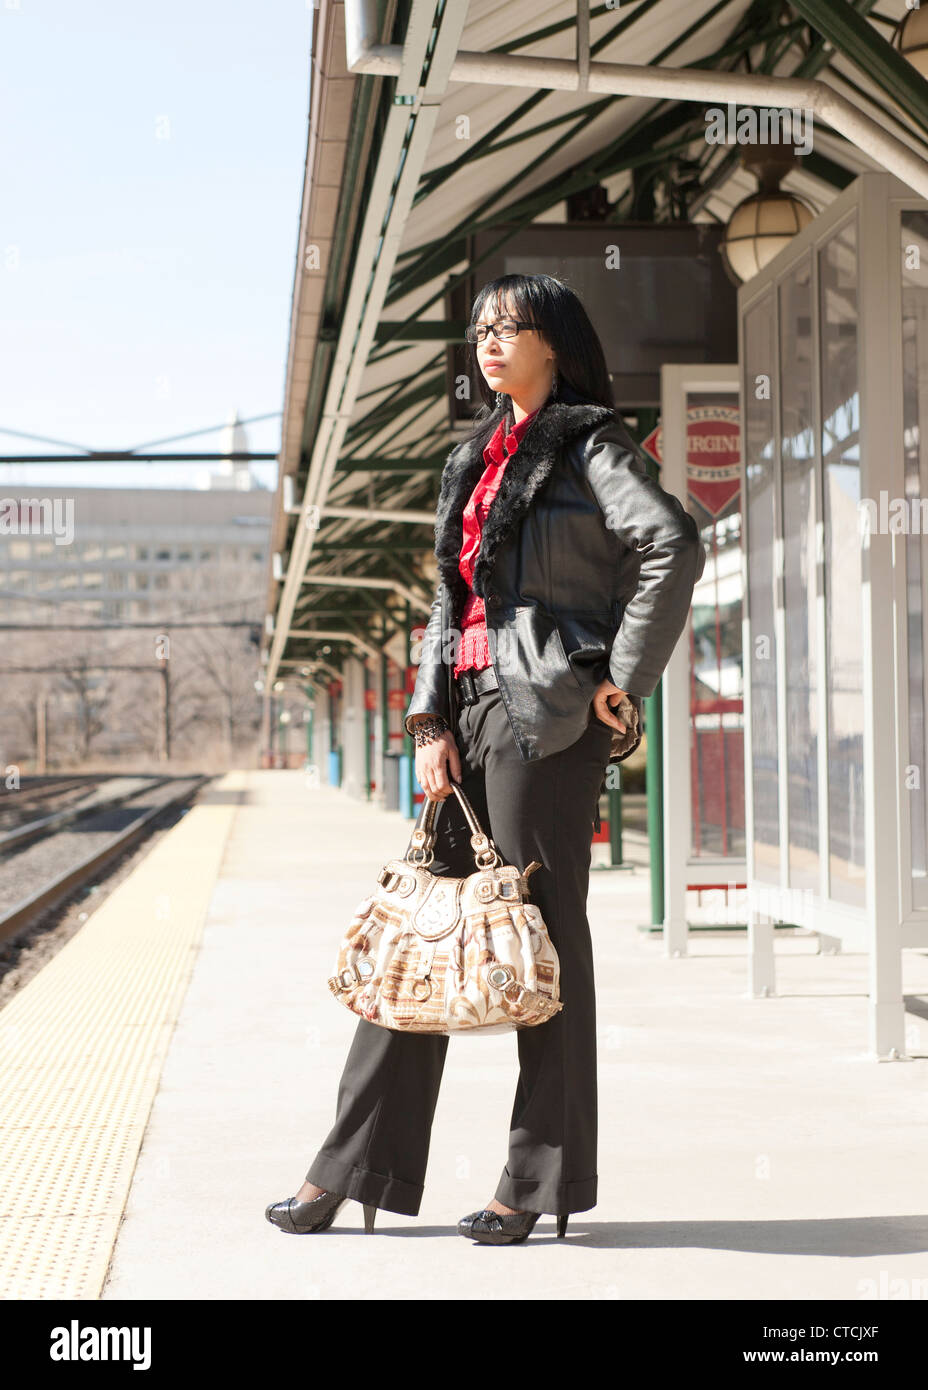 A woman waiting for a train Stock Photo